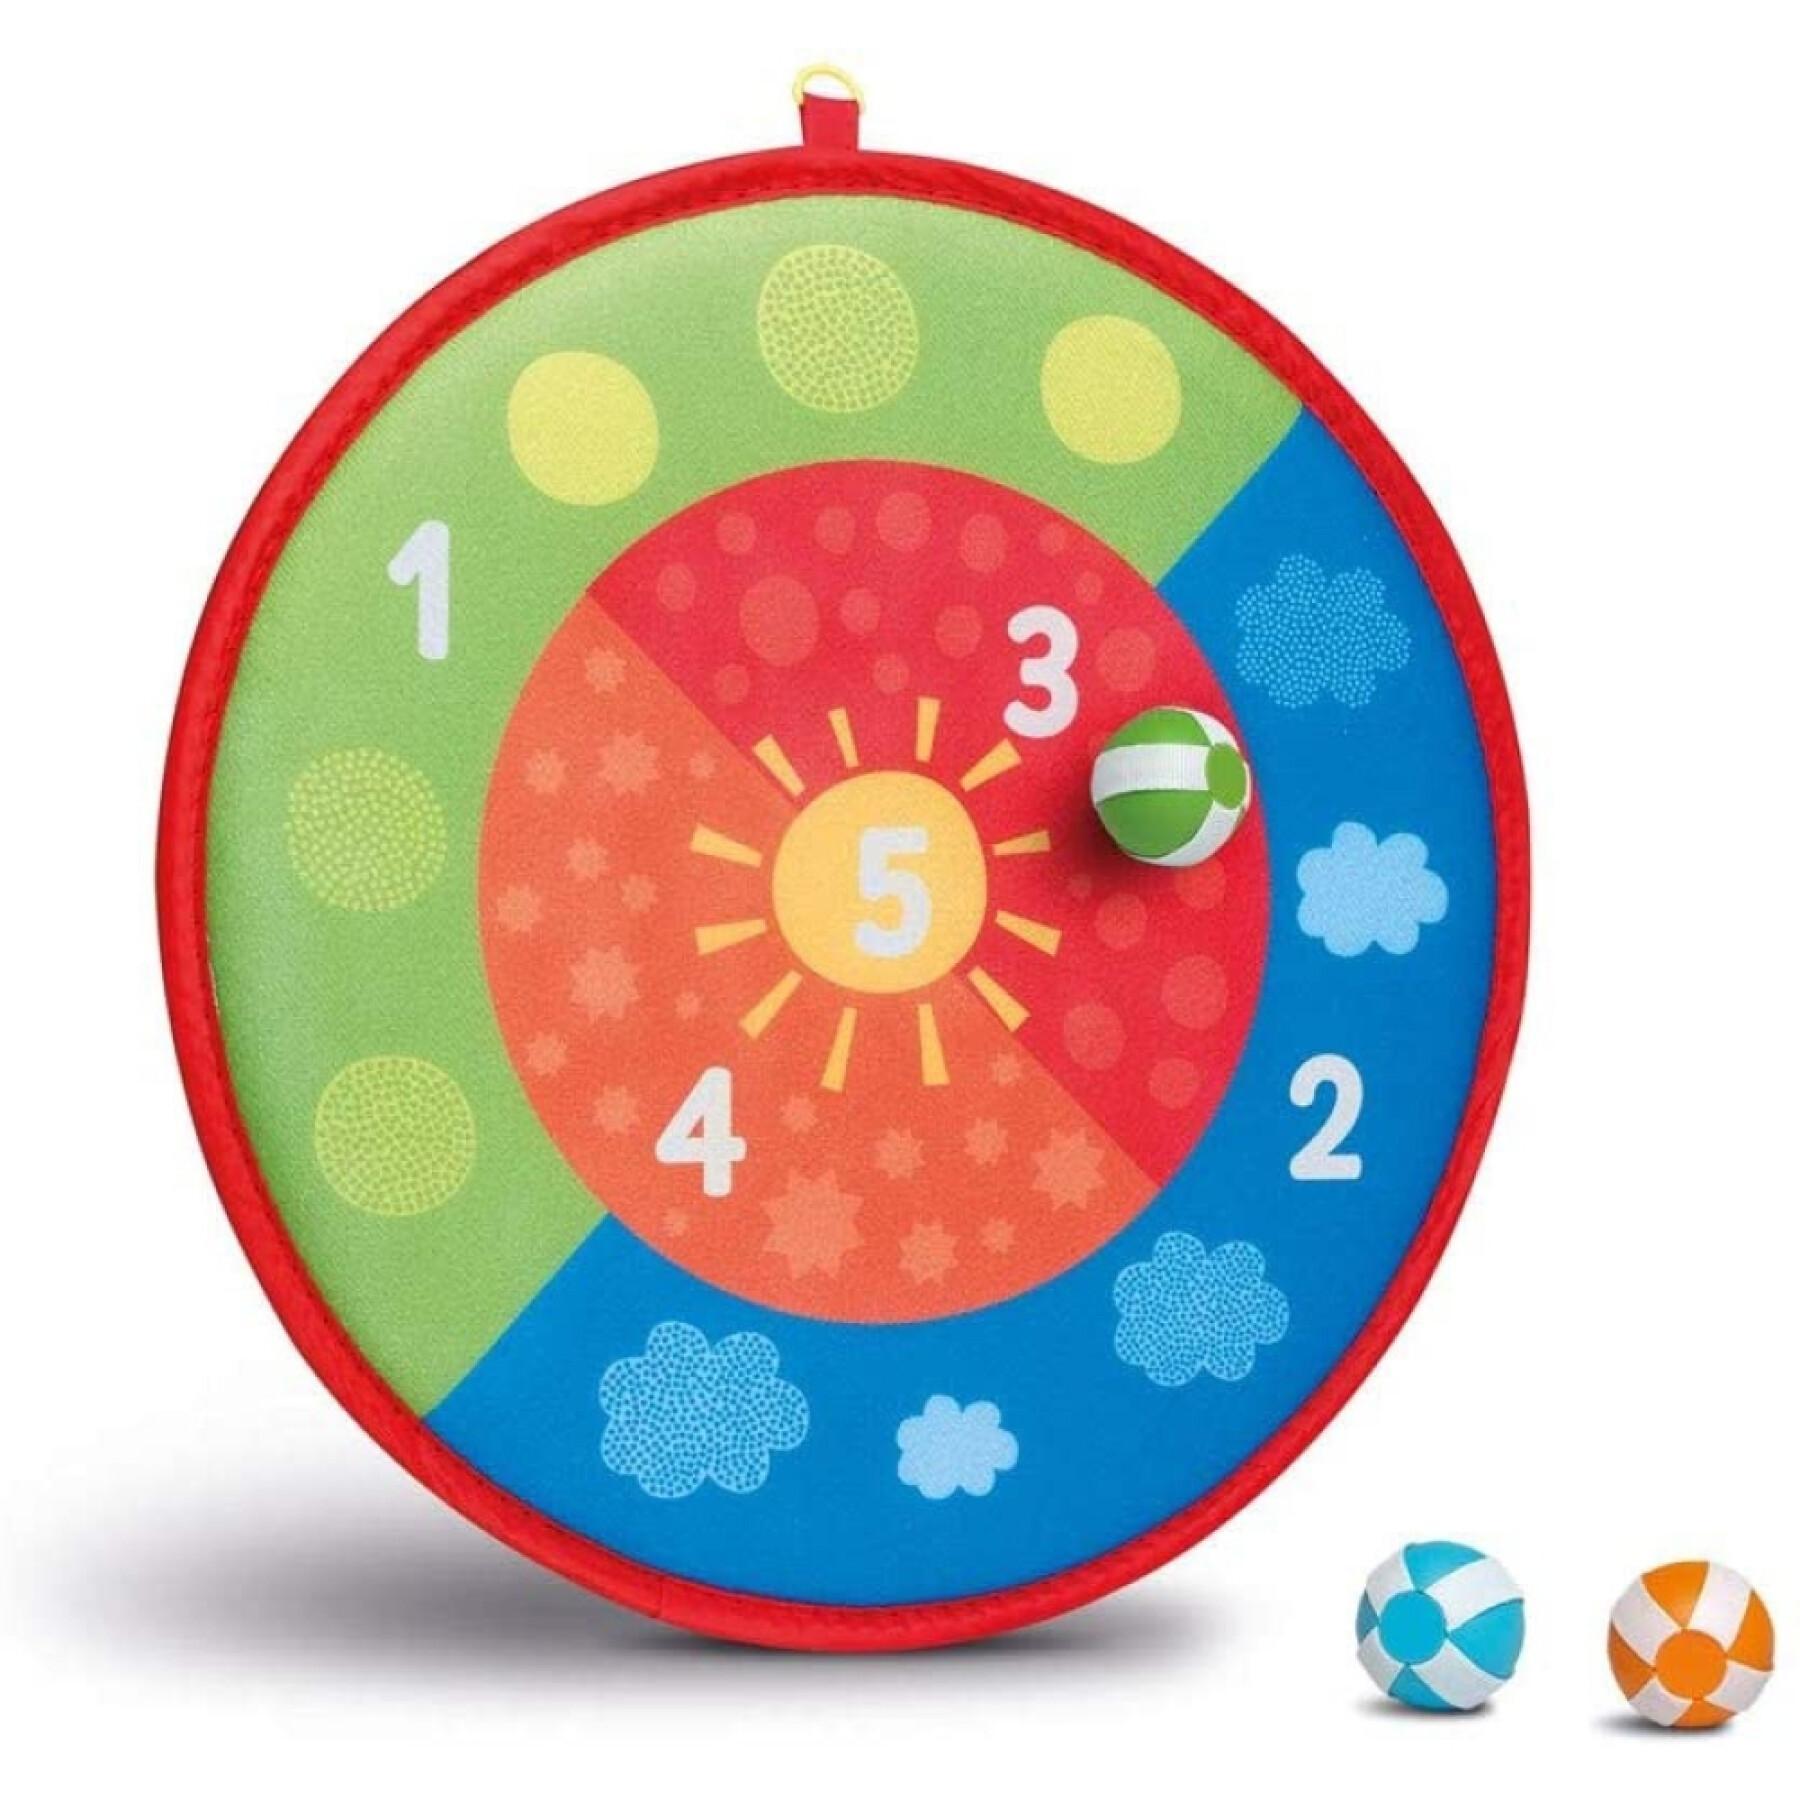 Harmless velcro dart game with sun and numbers Cayro